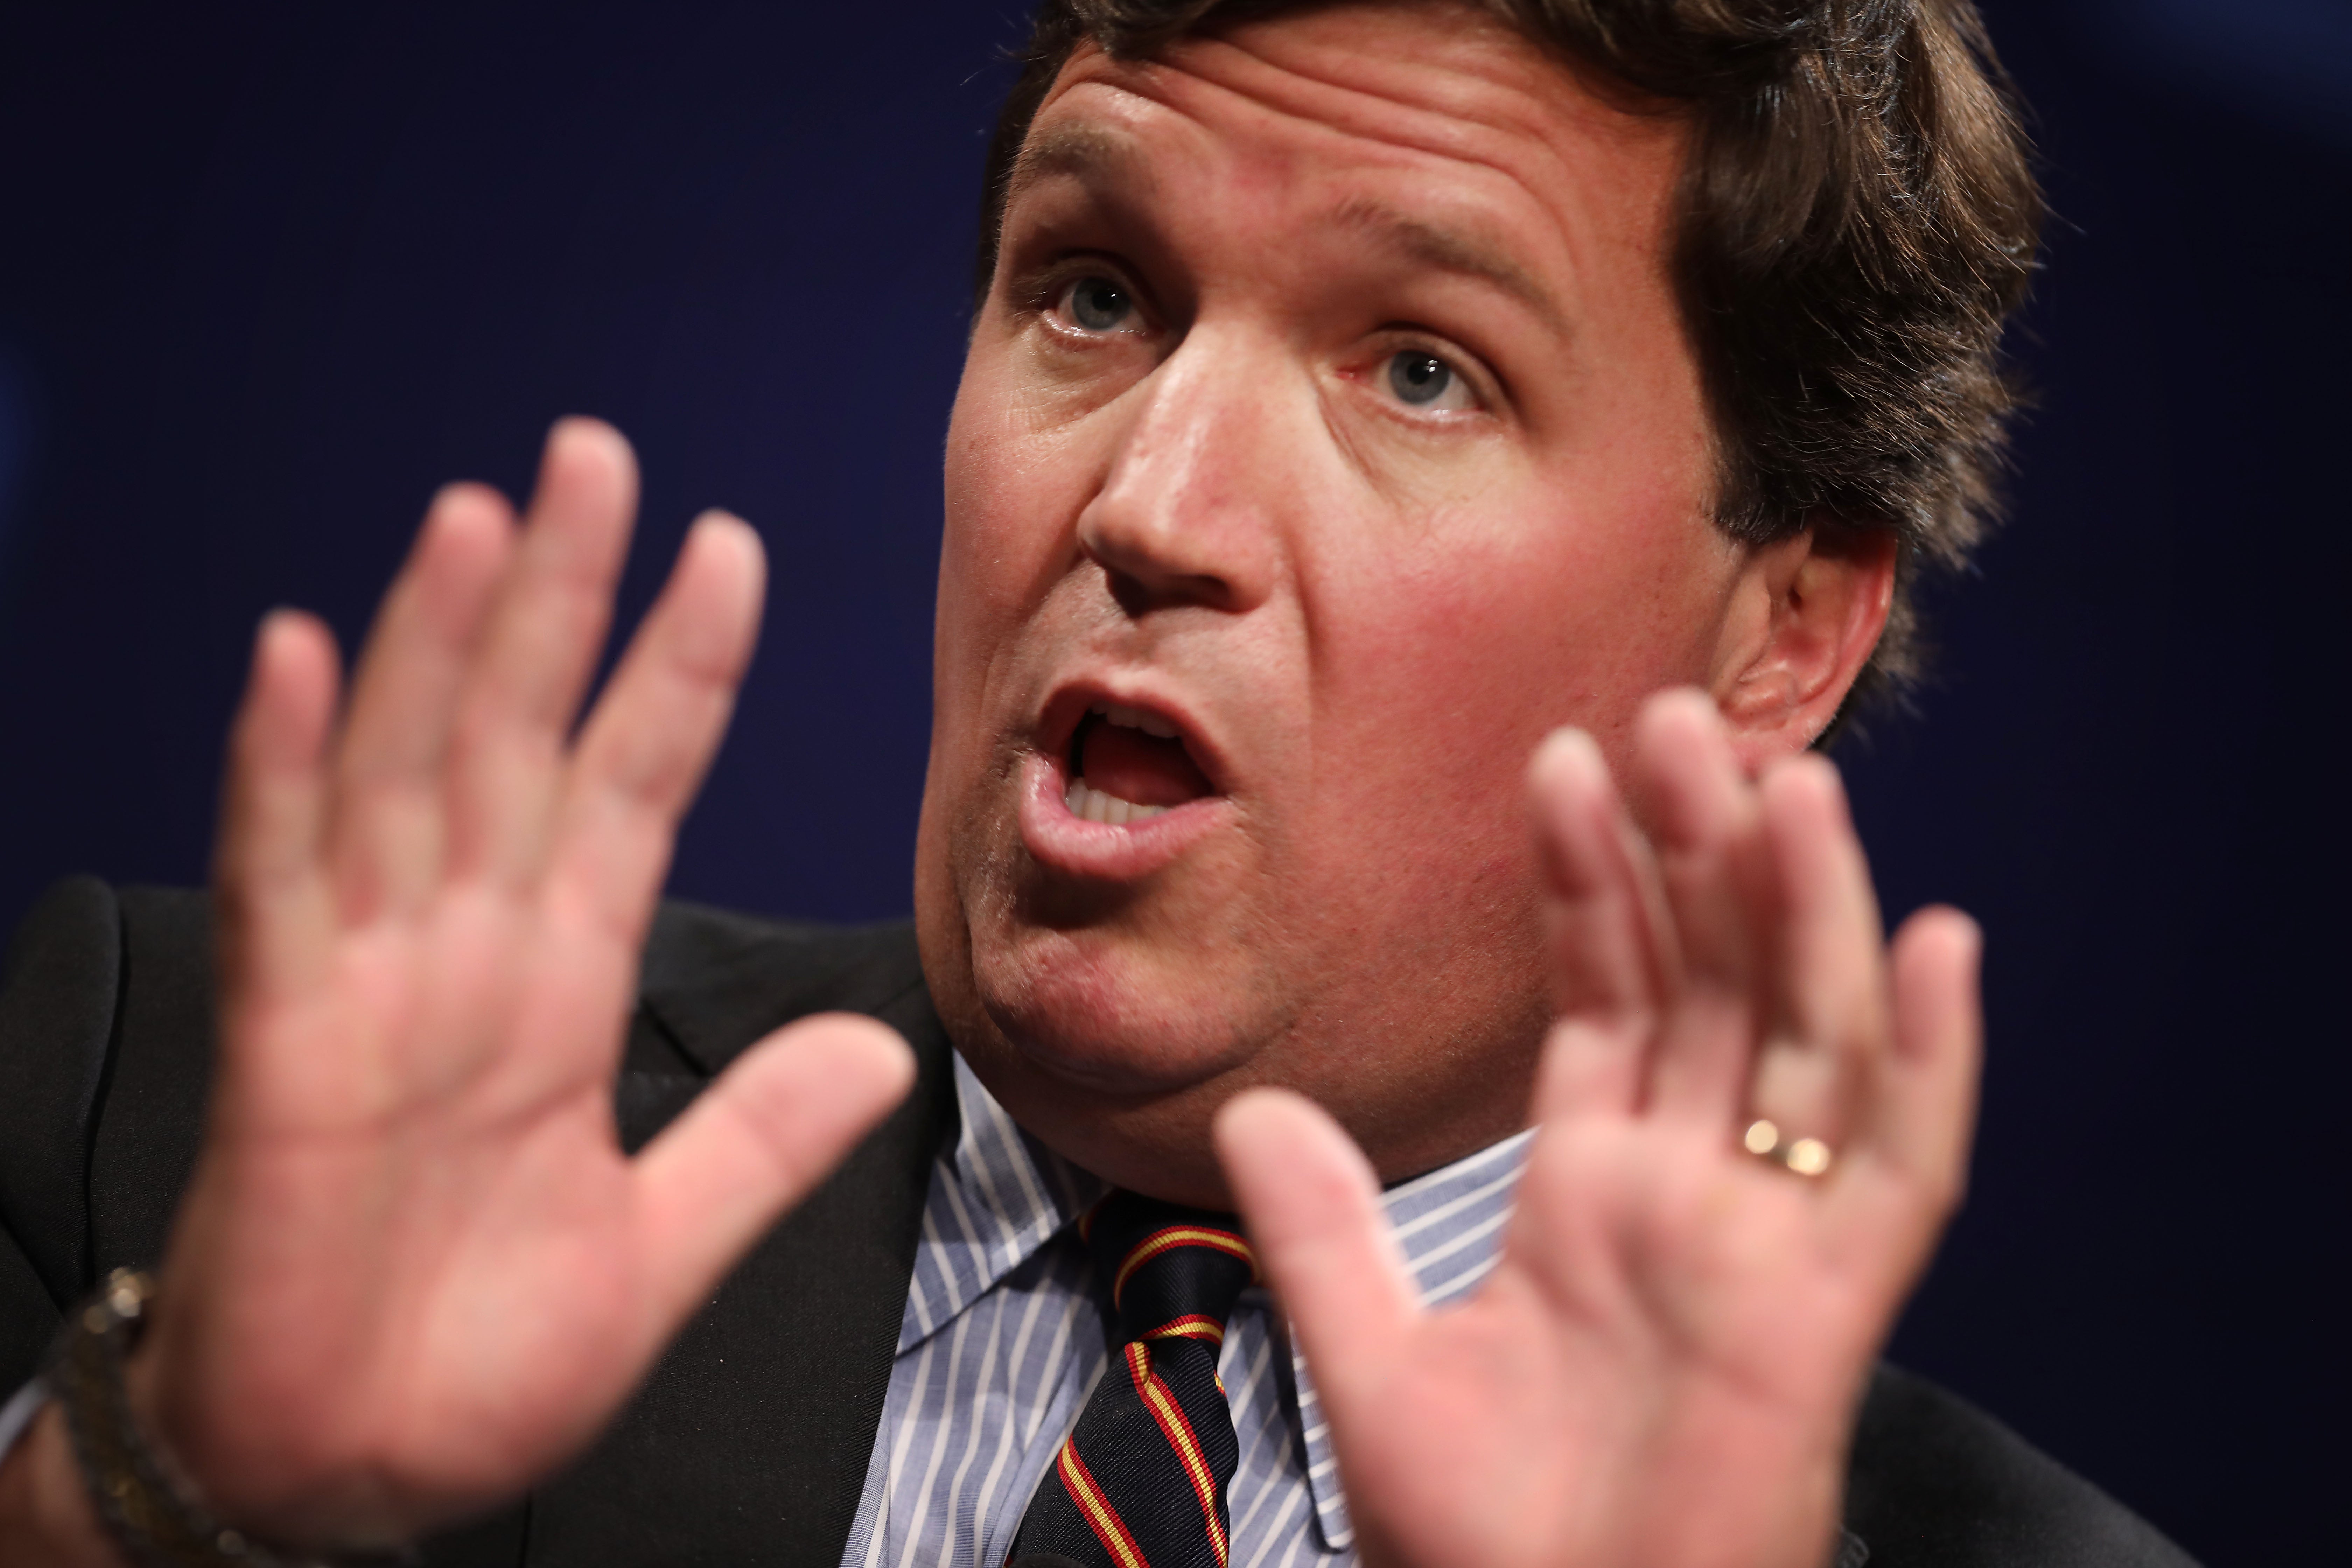 Fox News has announced that it has parted ways with Tucker Carlson